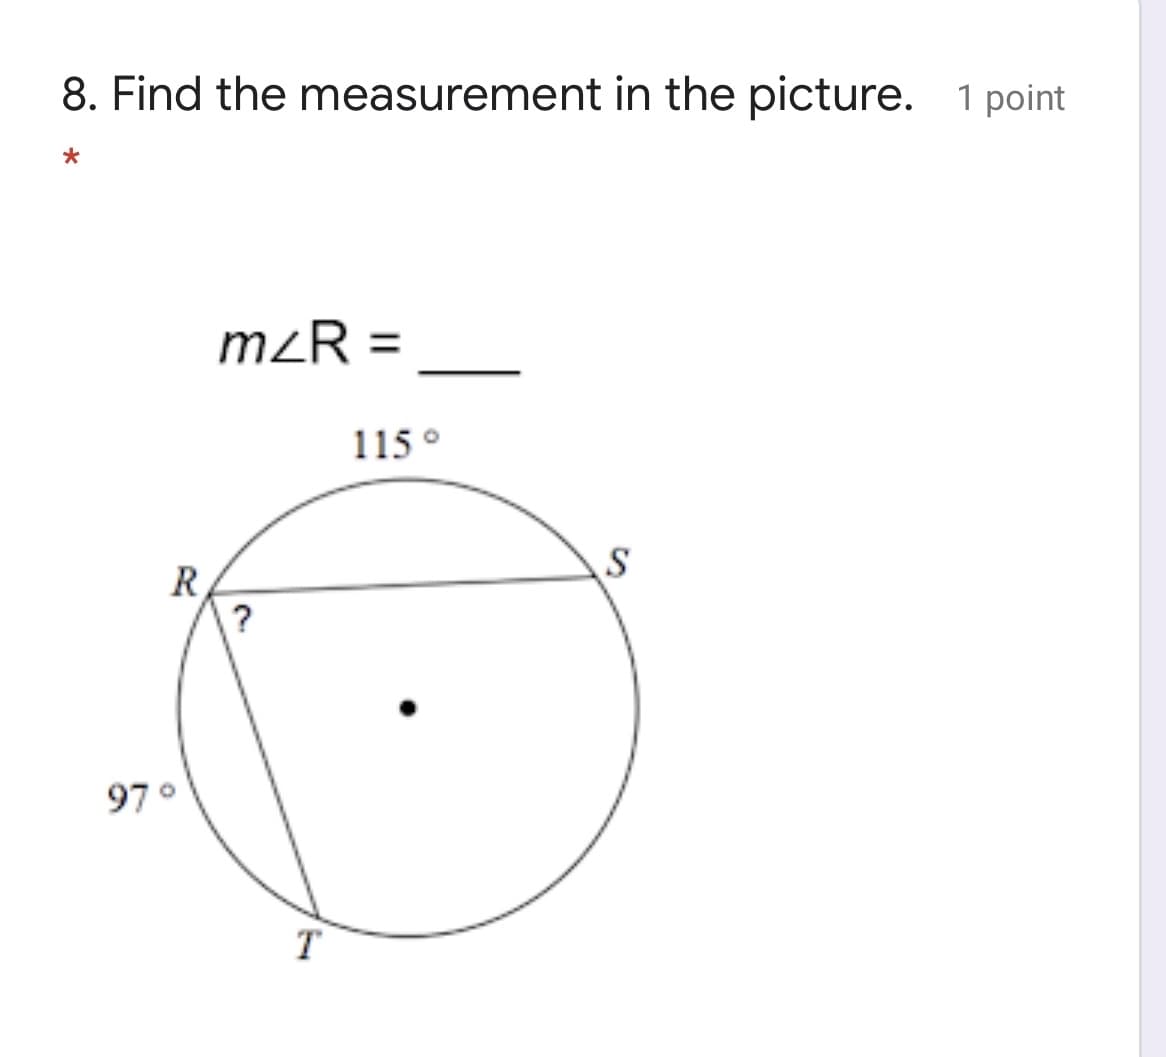 8. Find the measurement in the picture. 1 point
m²R =
115°
R
?
97°
T
